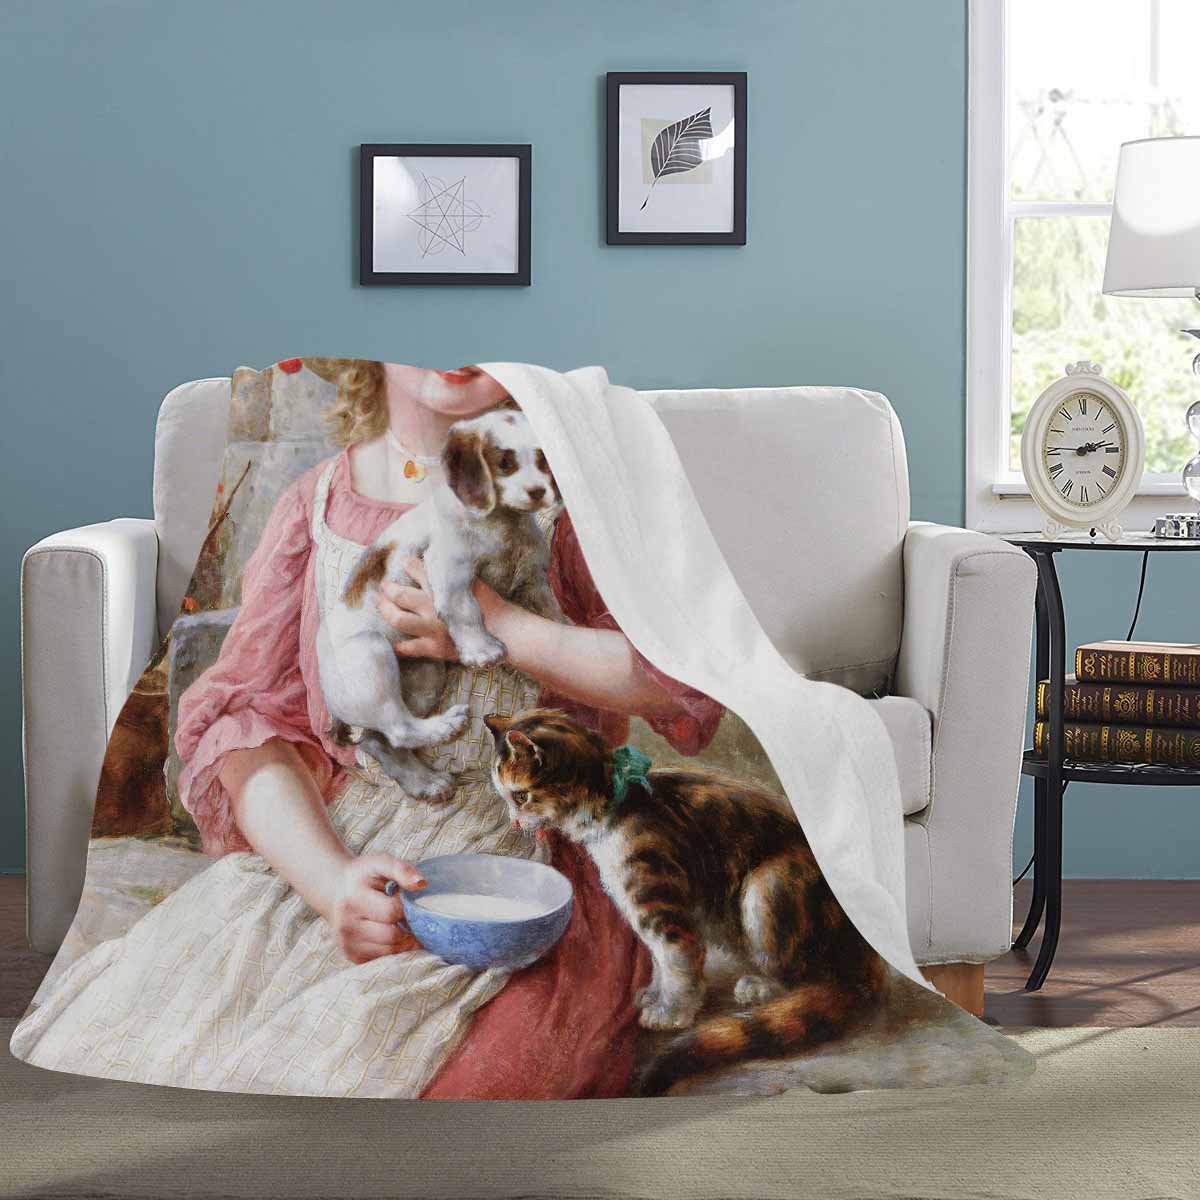 Victorian Girl Design BLANKET, LARGE 60 in x 80 in, New Friends